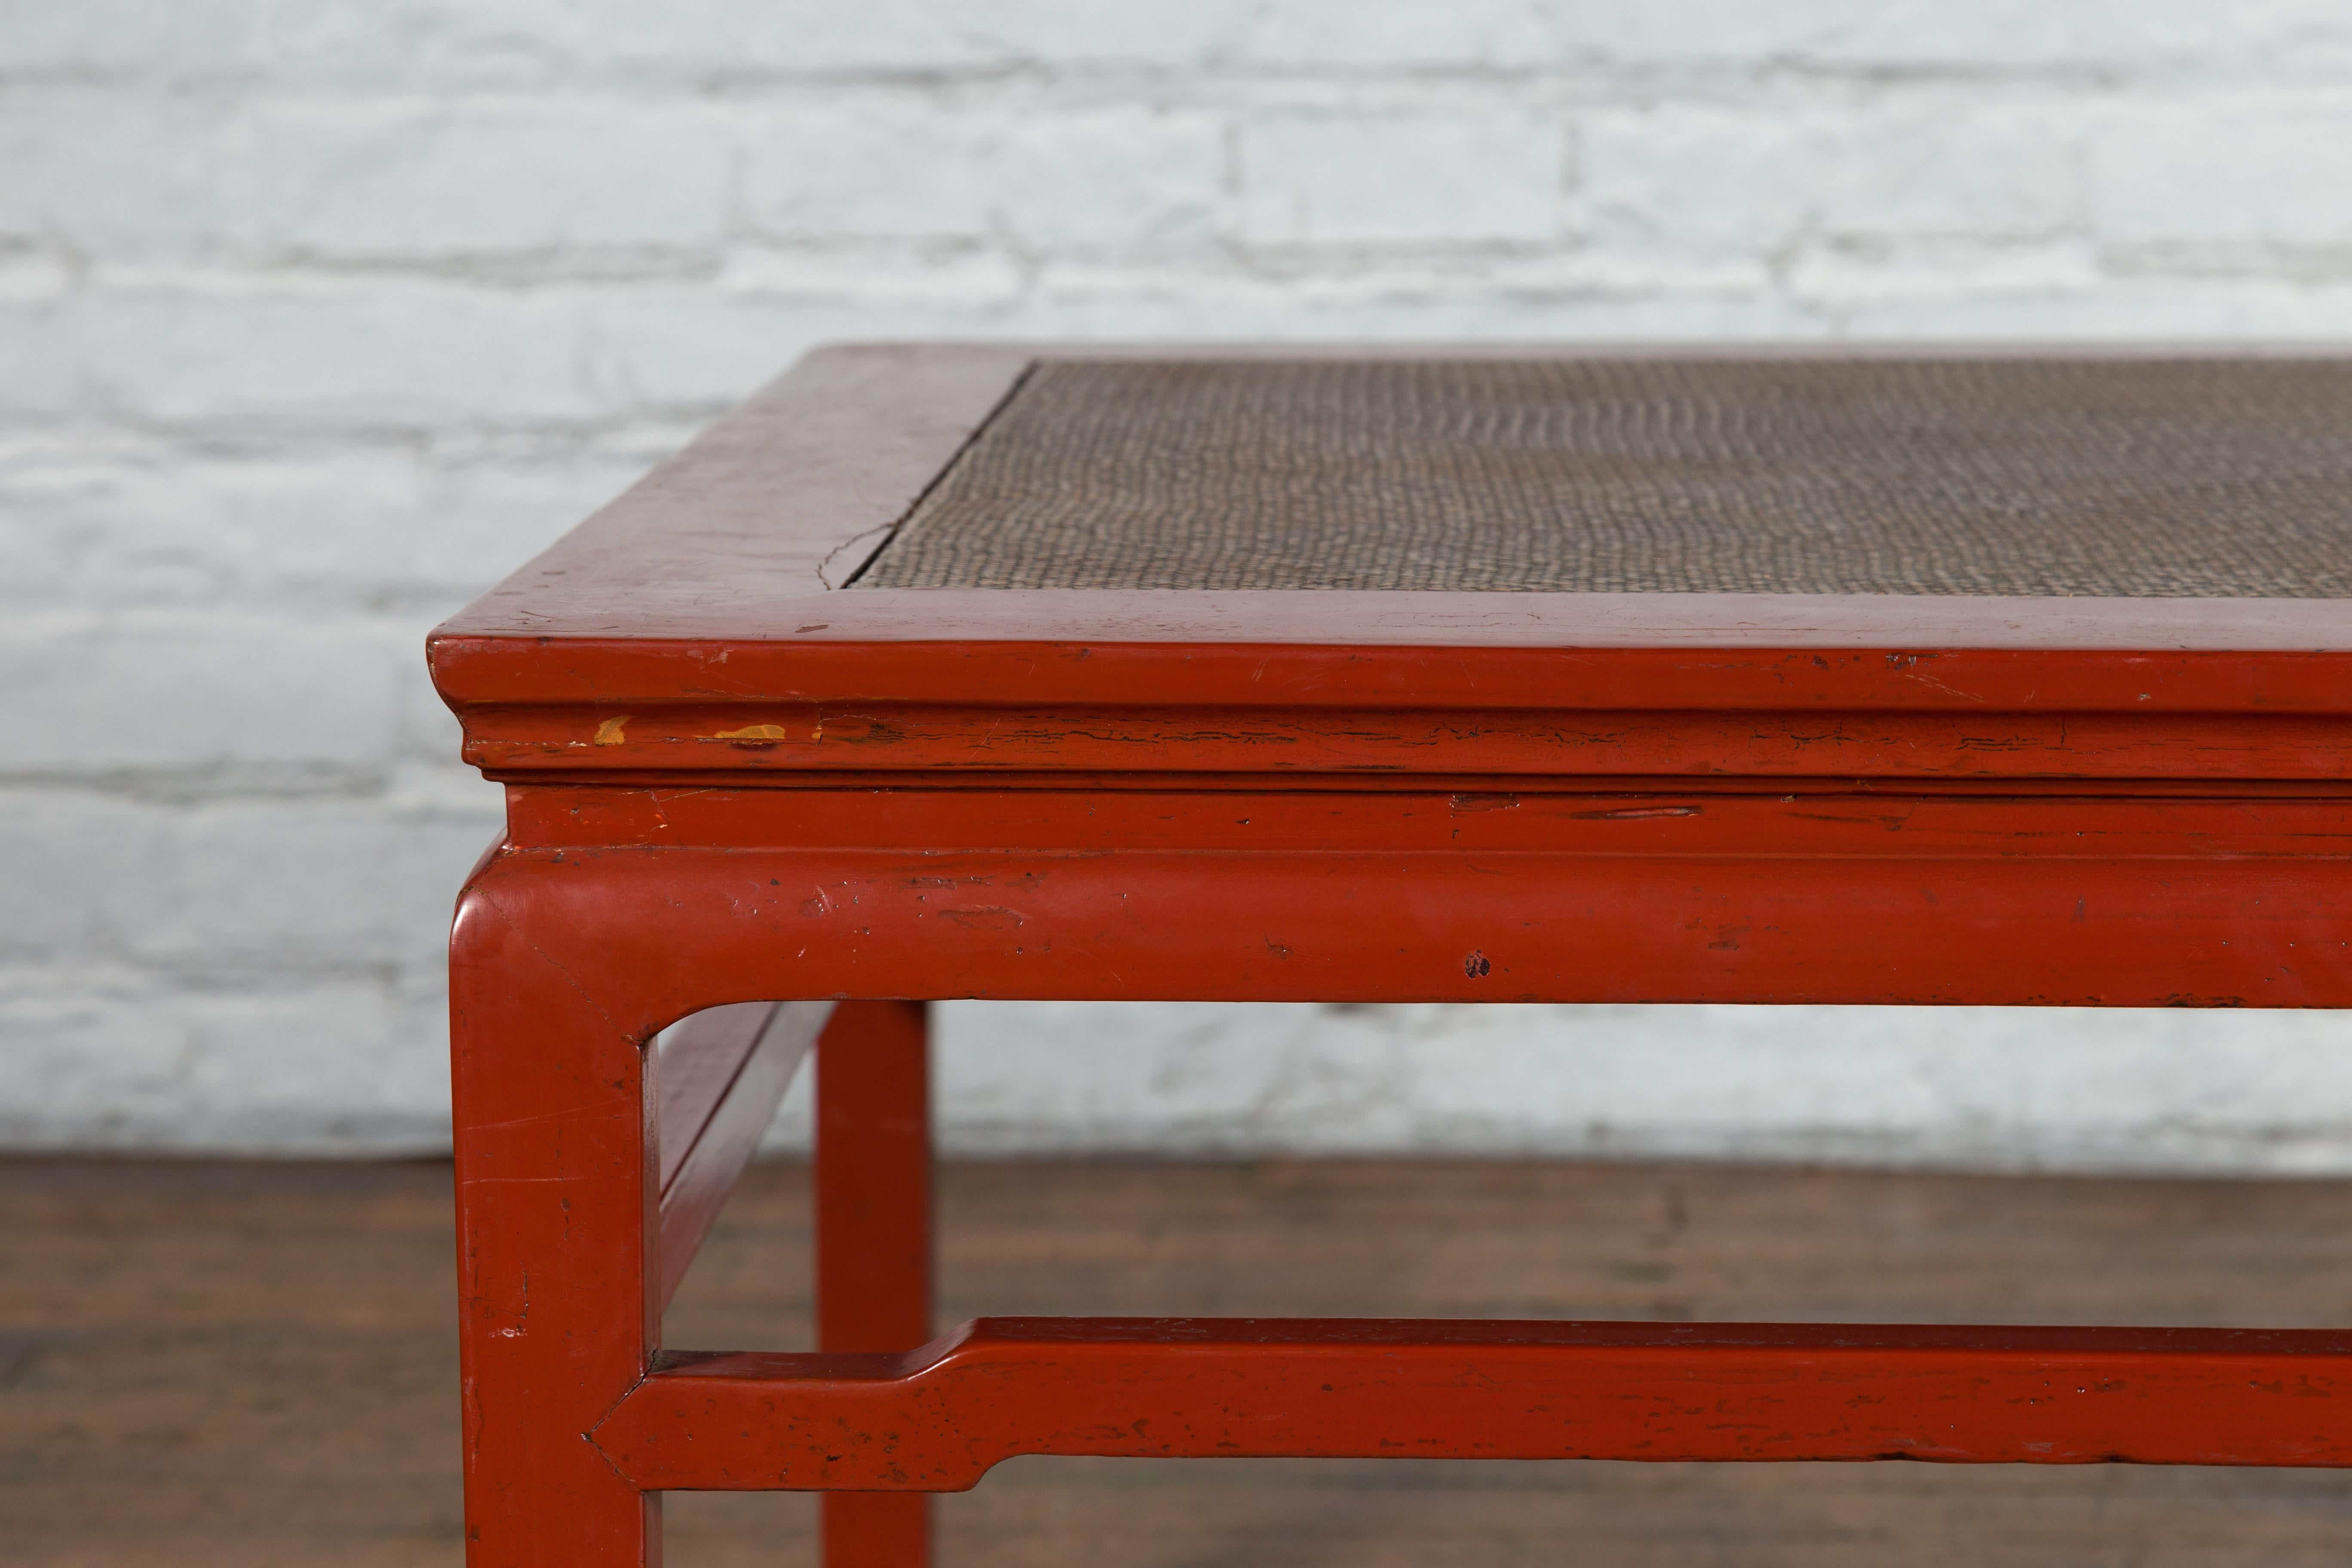 Chinese Early 20th Century Red Lacquer Coffee Table with Hand-Woven Rattan Top In Good Condition For Sale In Yonkers, NY